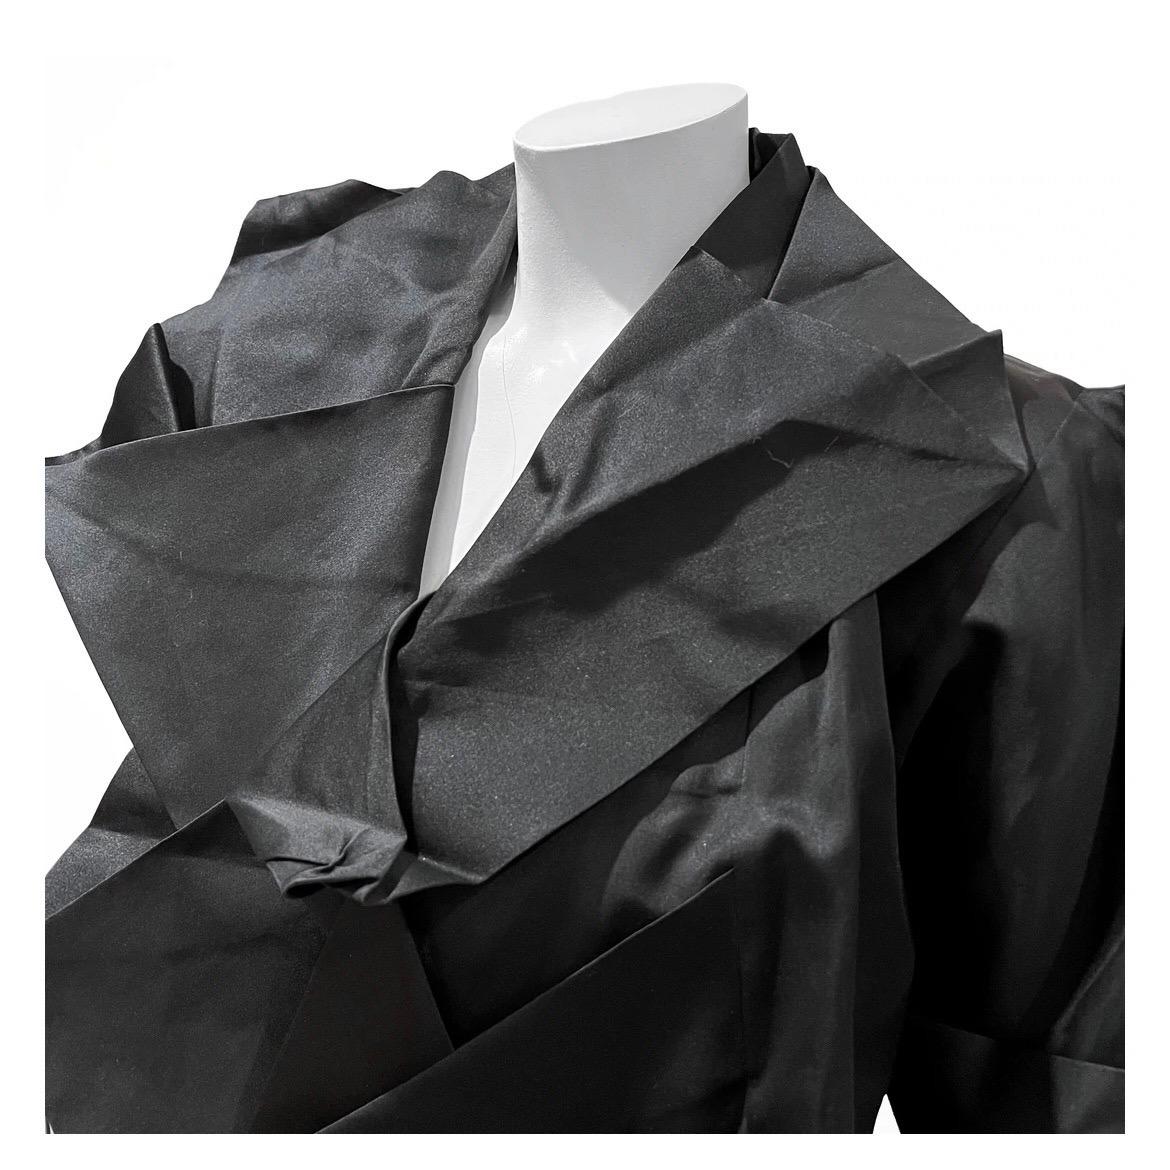 Vintage jacket by Issey Miyake 
1991
Made in Japan 
Black 
Pleated throughout 
Angled sleeves
100% silk 
Excellent vintage condition; some small snags but otherwise very little visual wear. 
Size/Measurements:
Size M
37